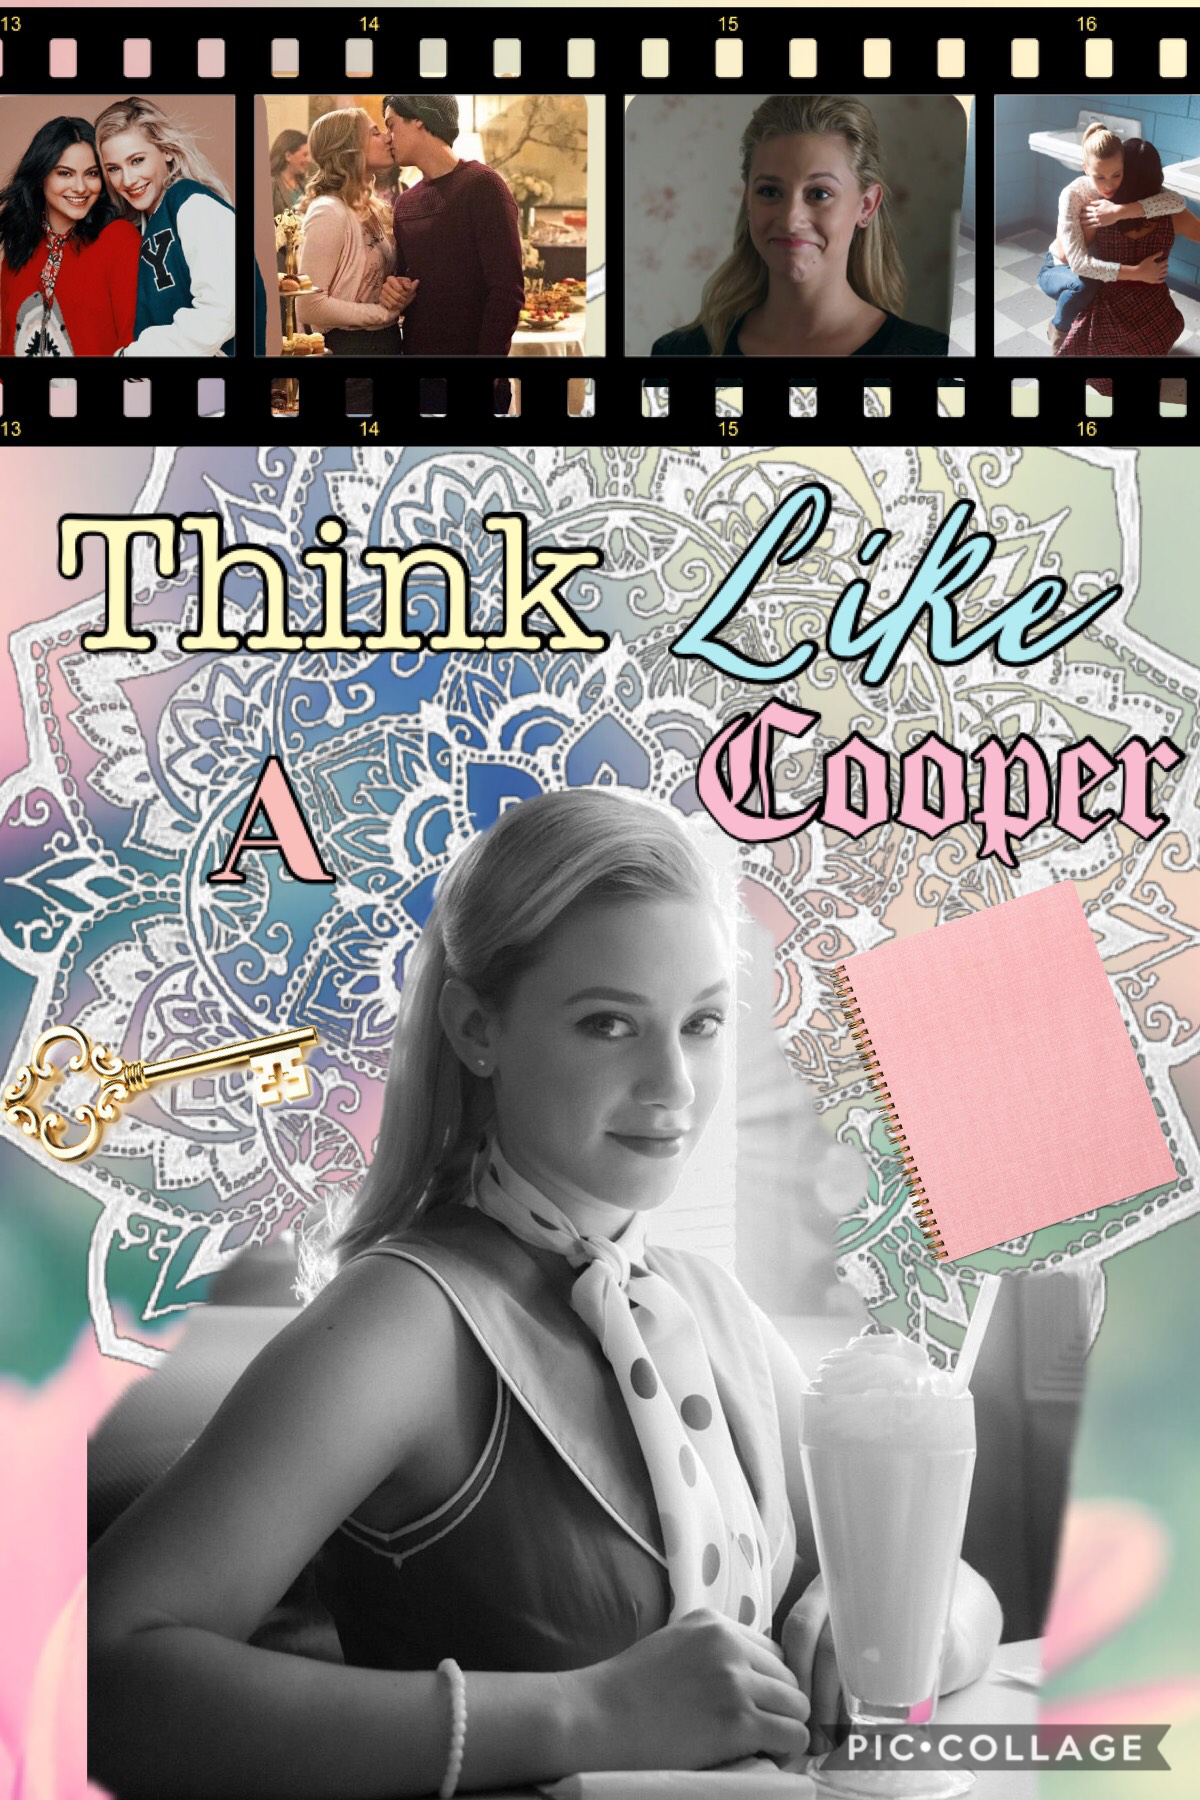 Betty cooper riverdale Collage 